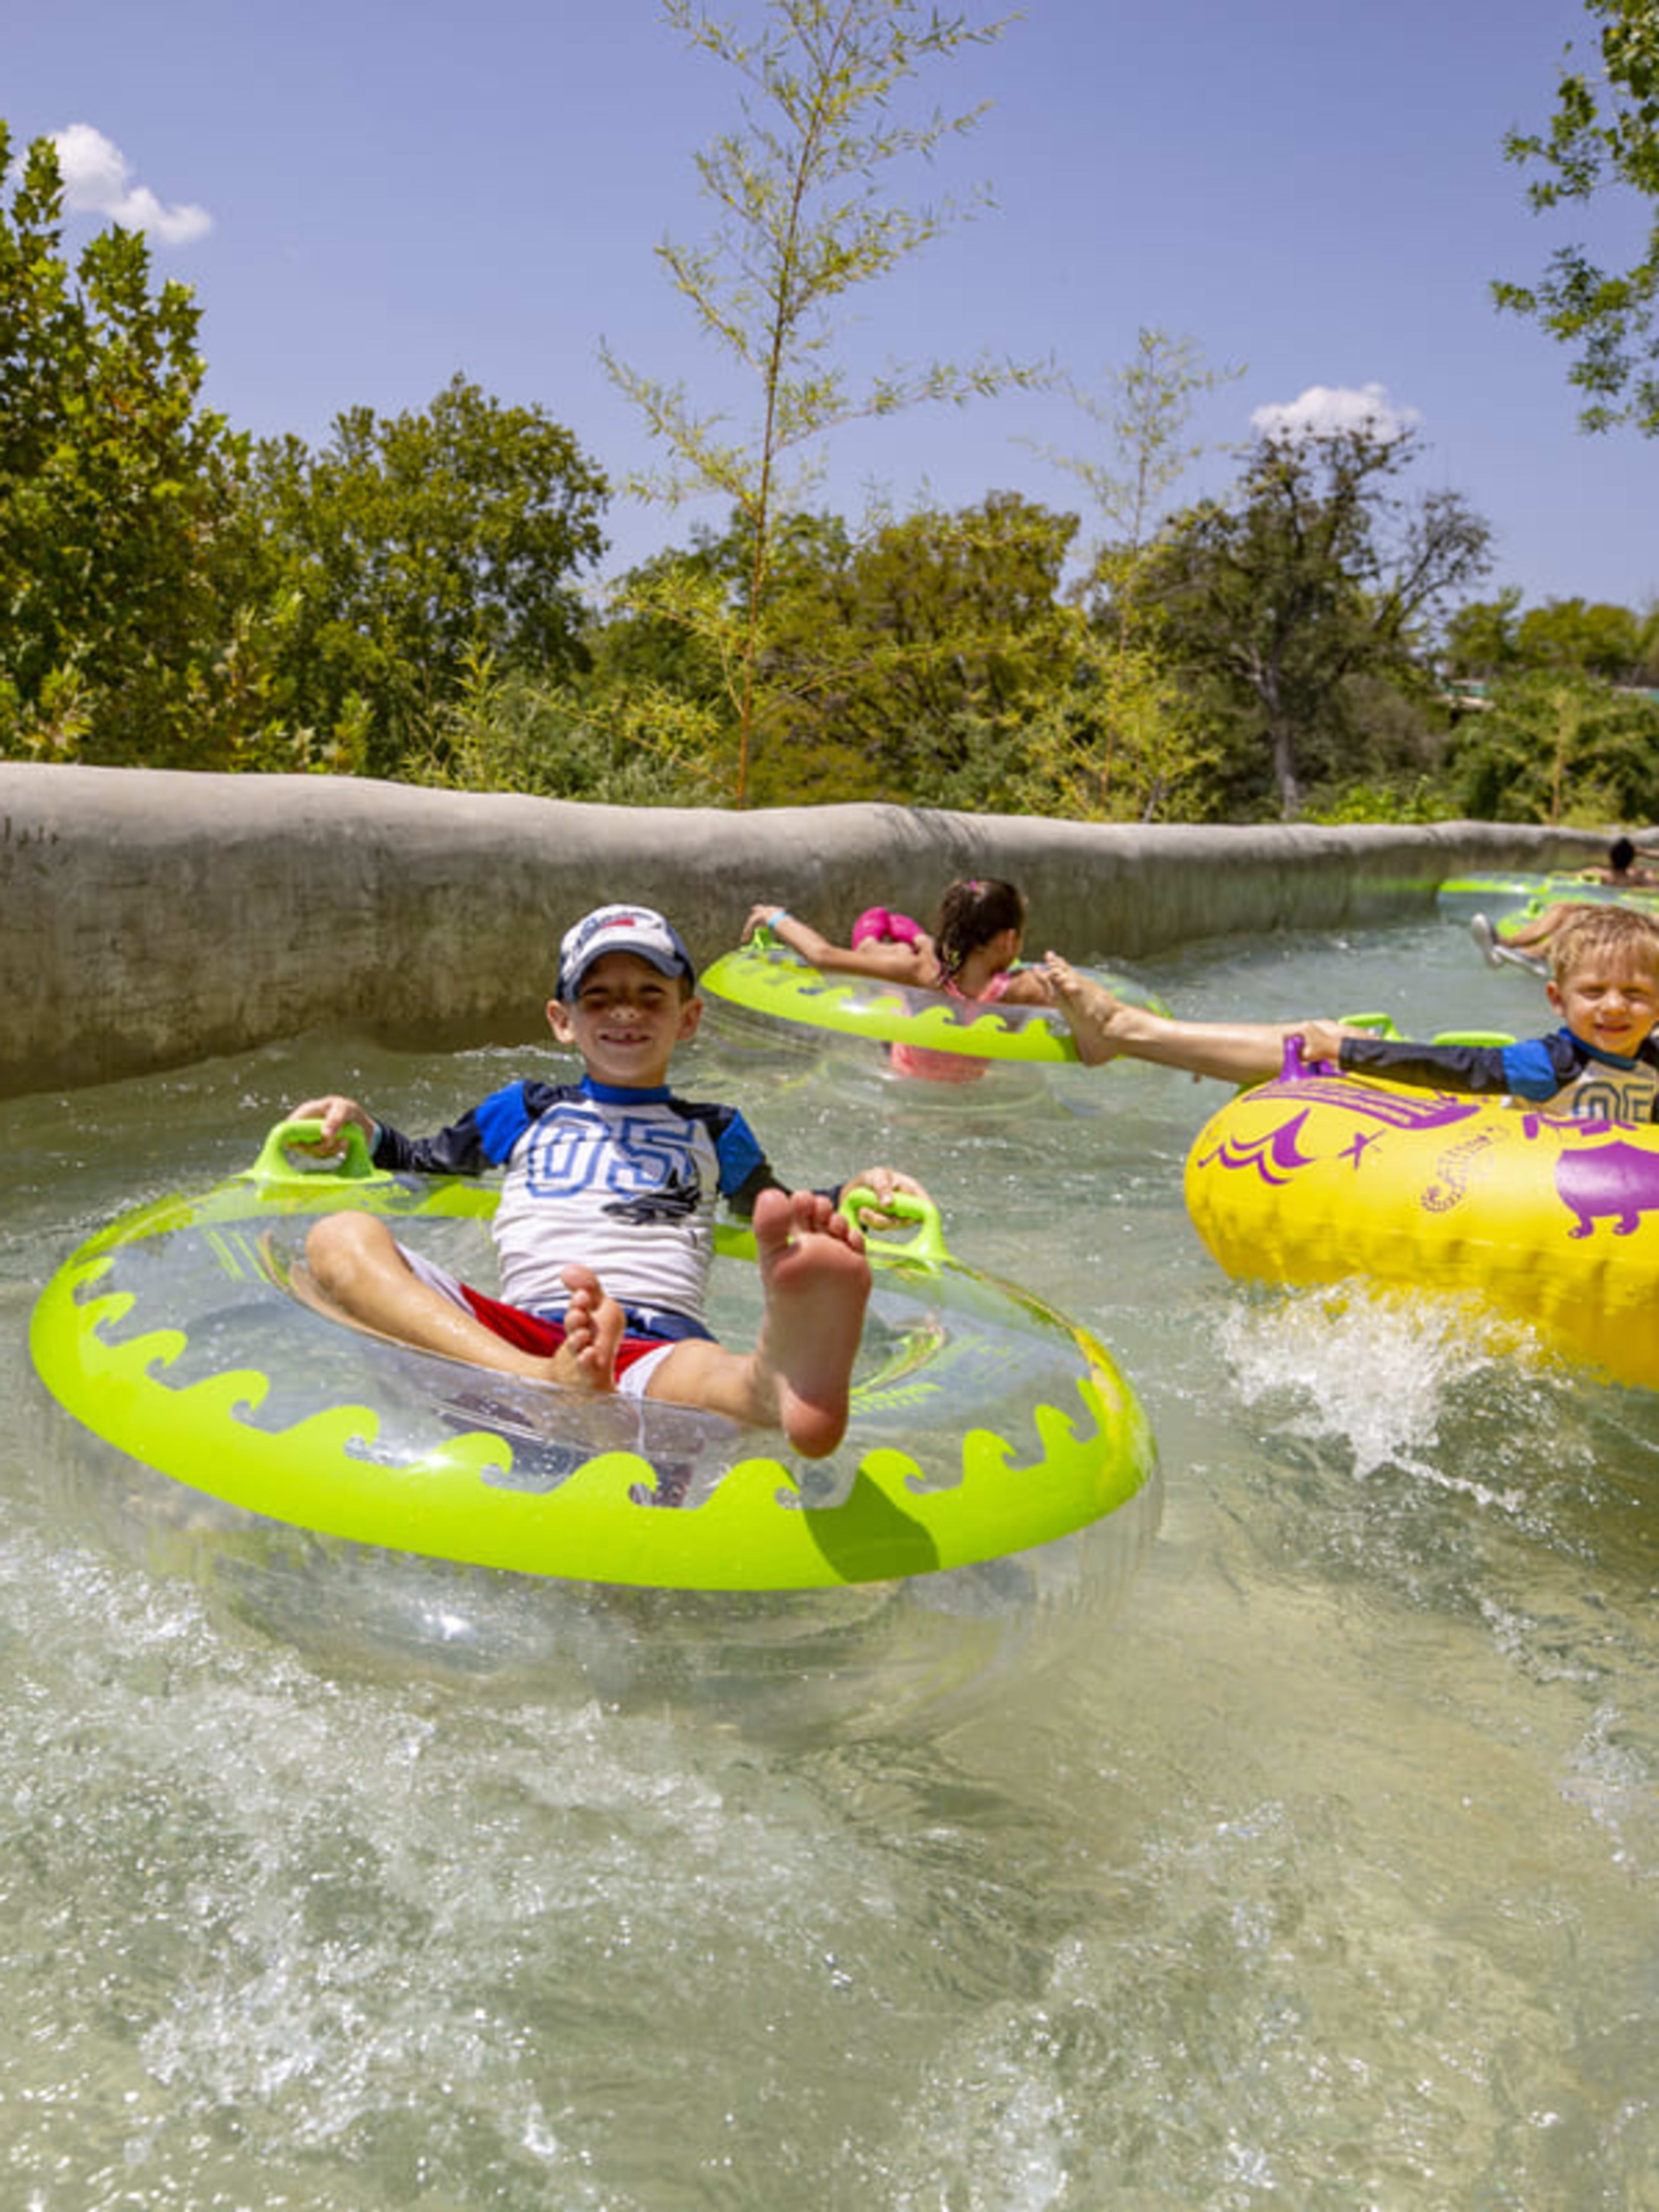 Family on a lazy river at Shlitterbahn Waterpark in New Braunfels, Texas.